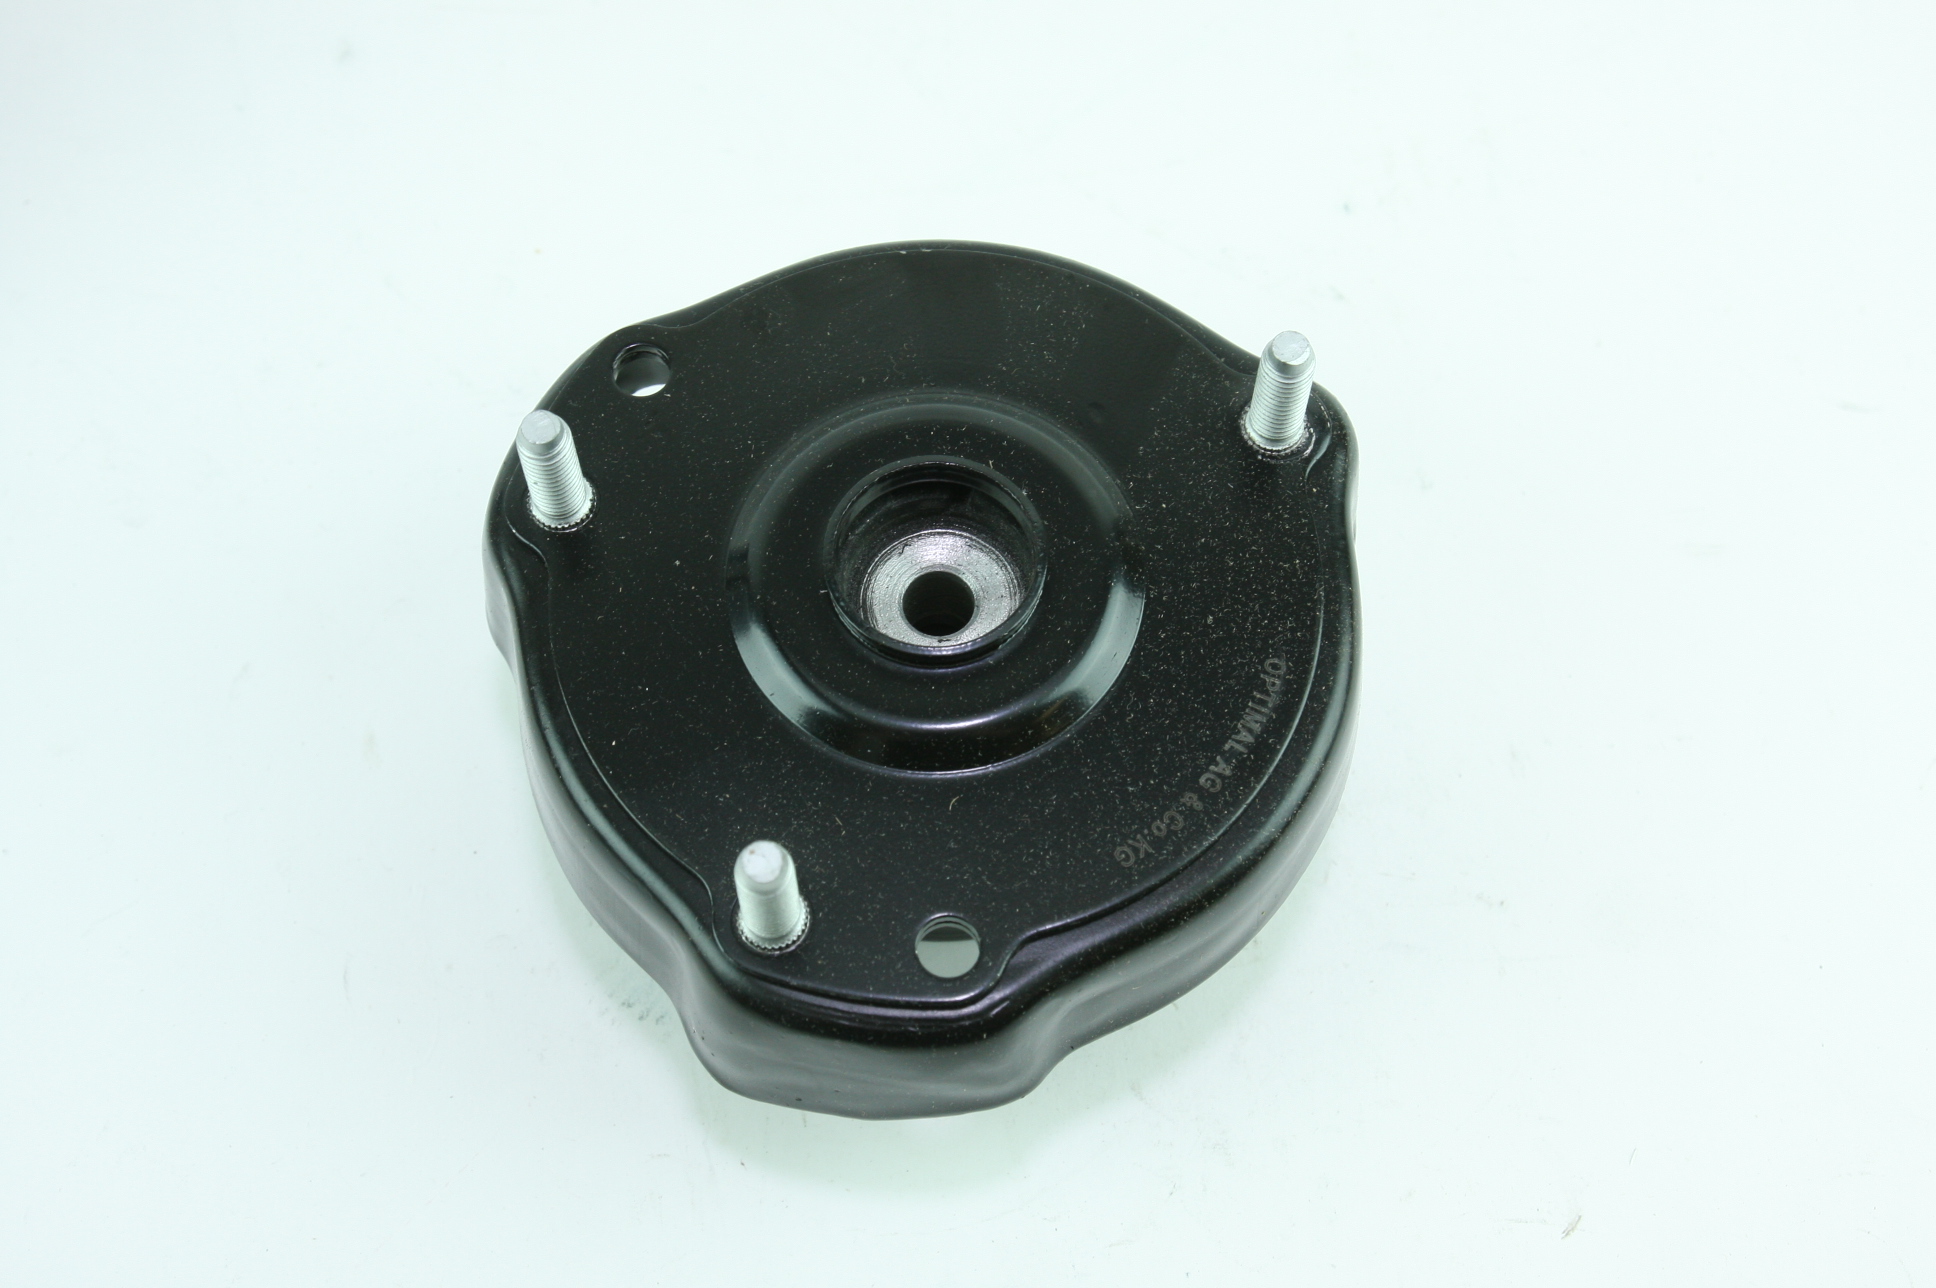 New Optimal German Made F8-6059 Top Strut Mount for Mercedes Free Shipping - image 4